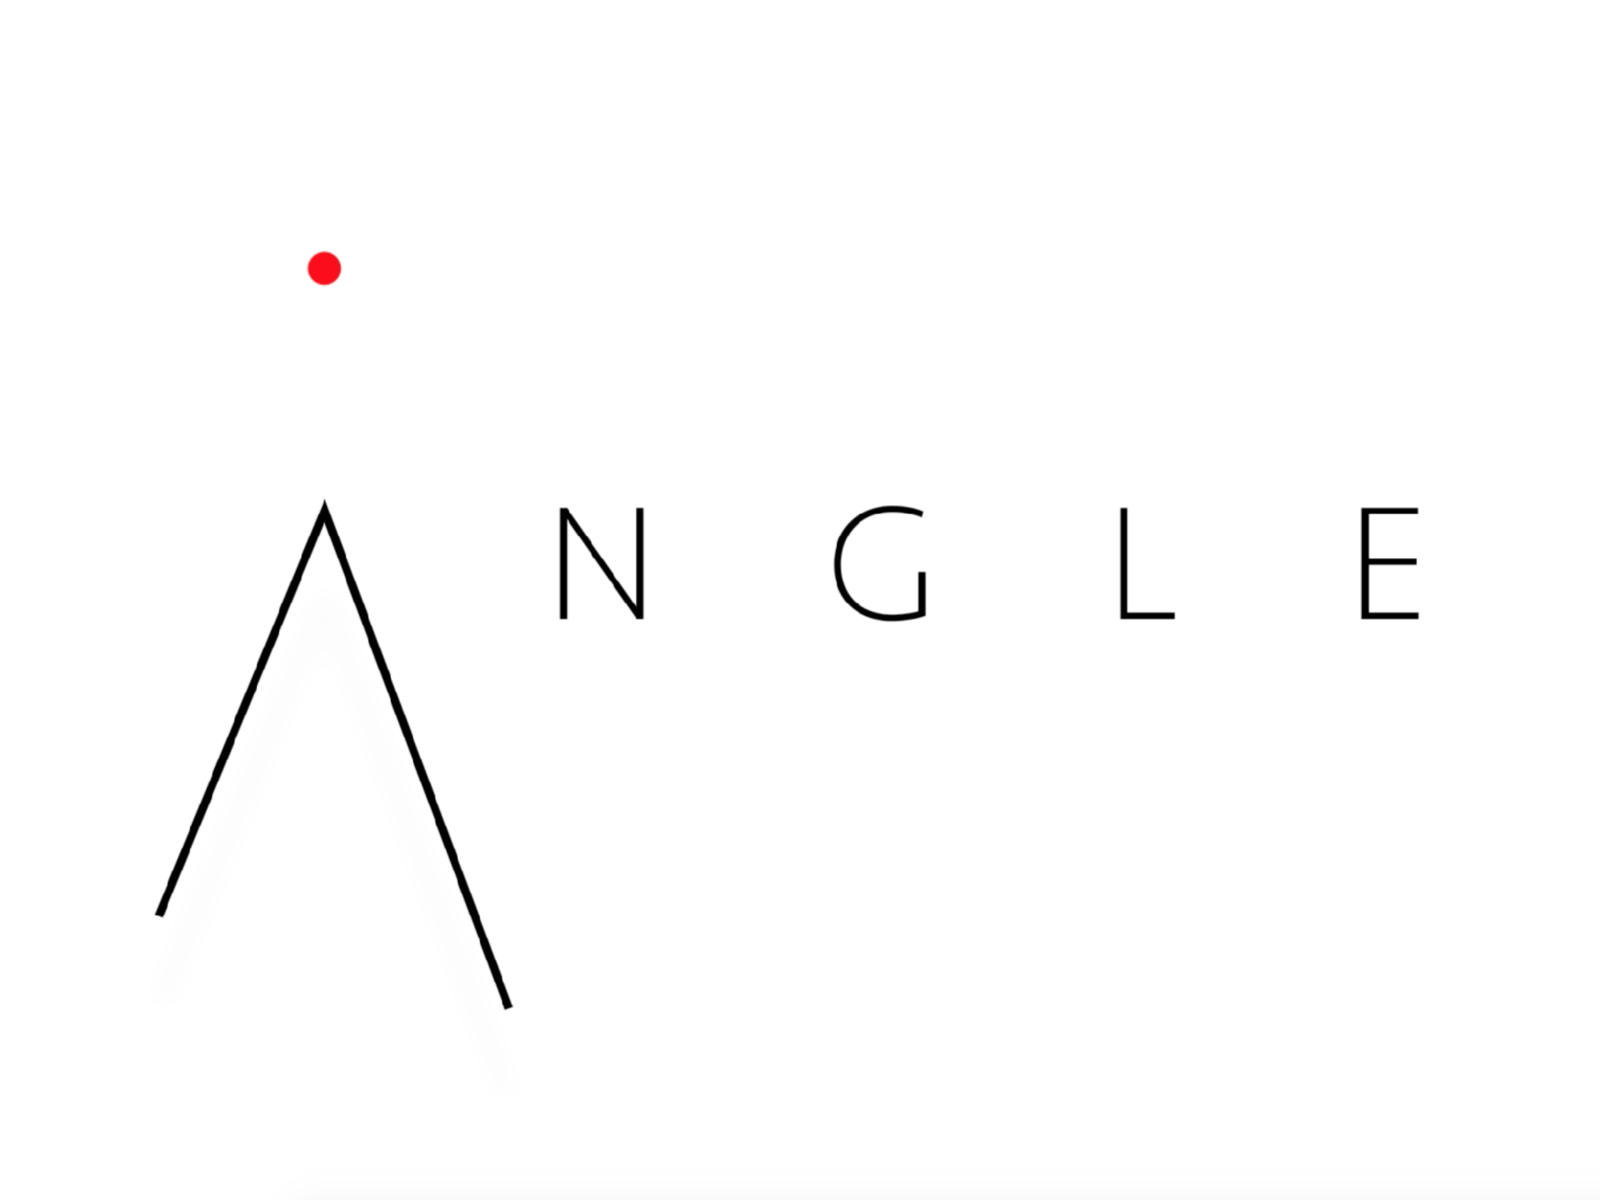 Angle by Mike Fox on Dribbble